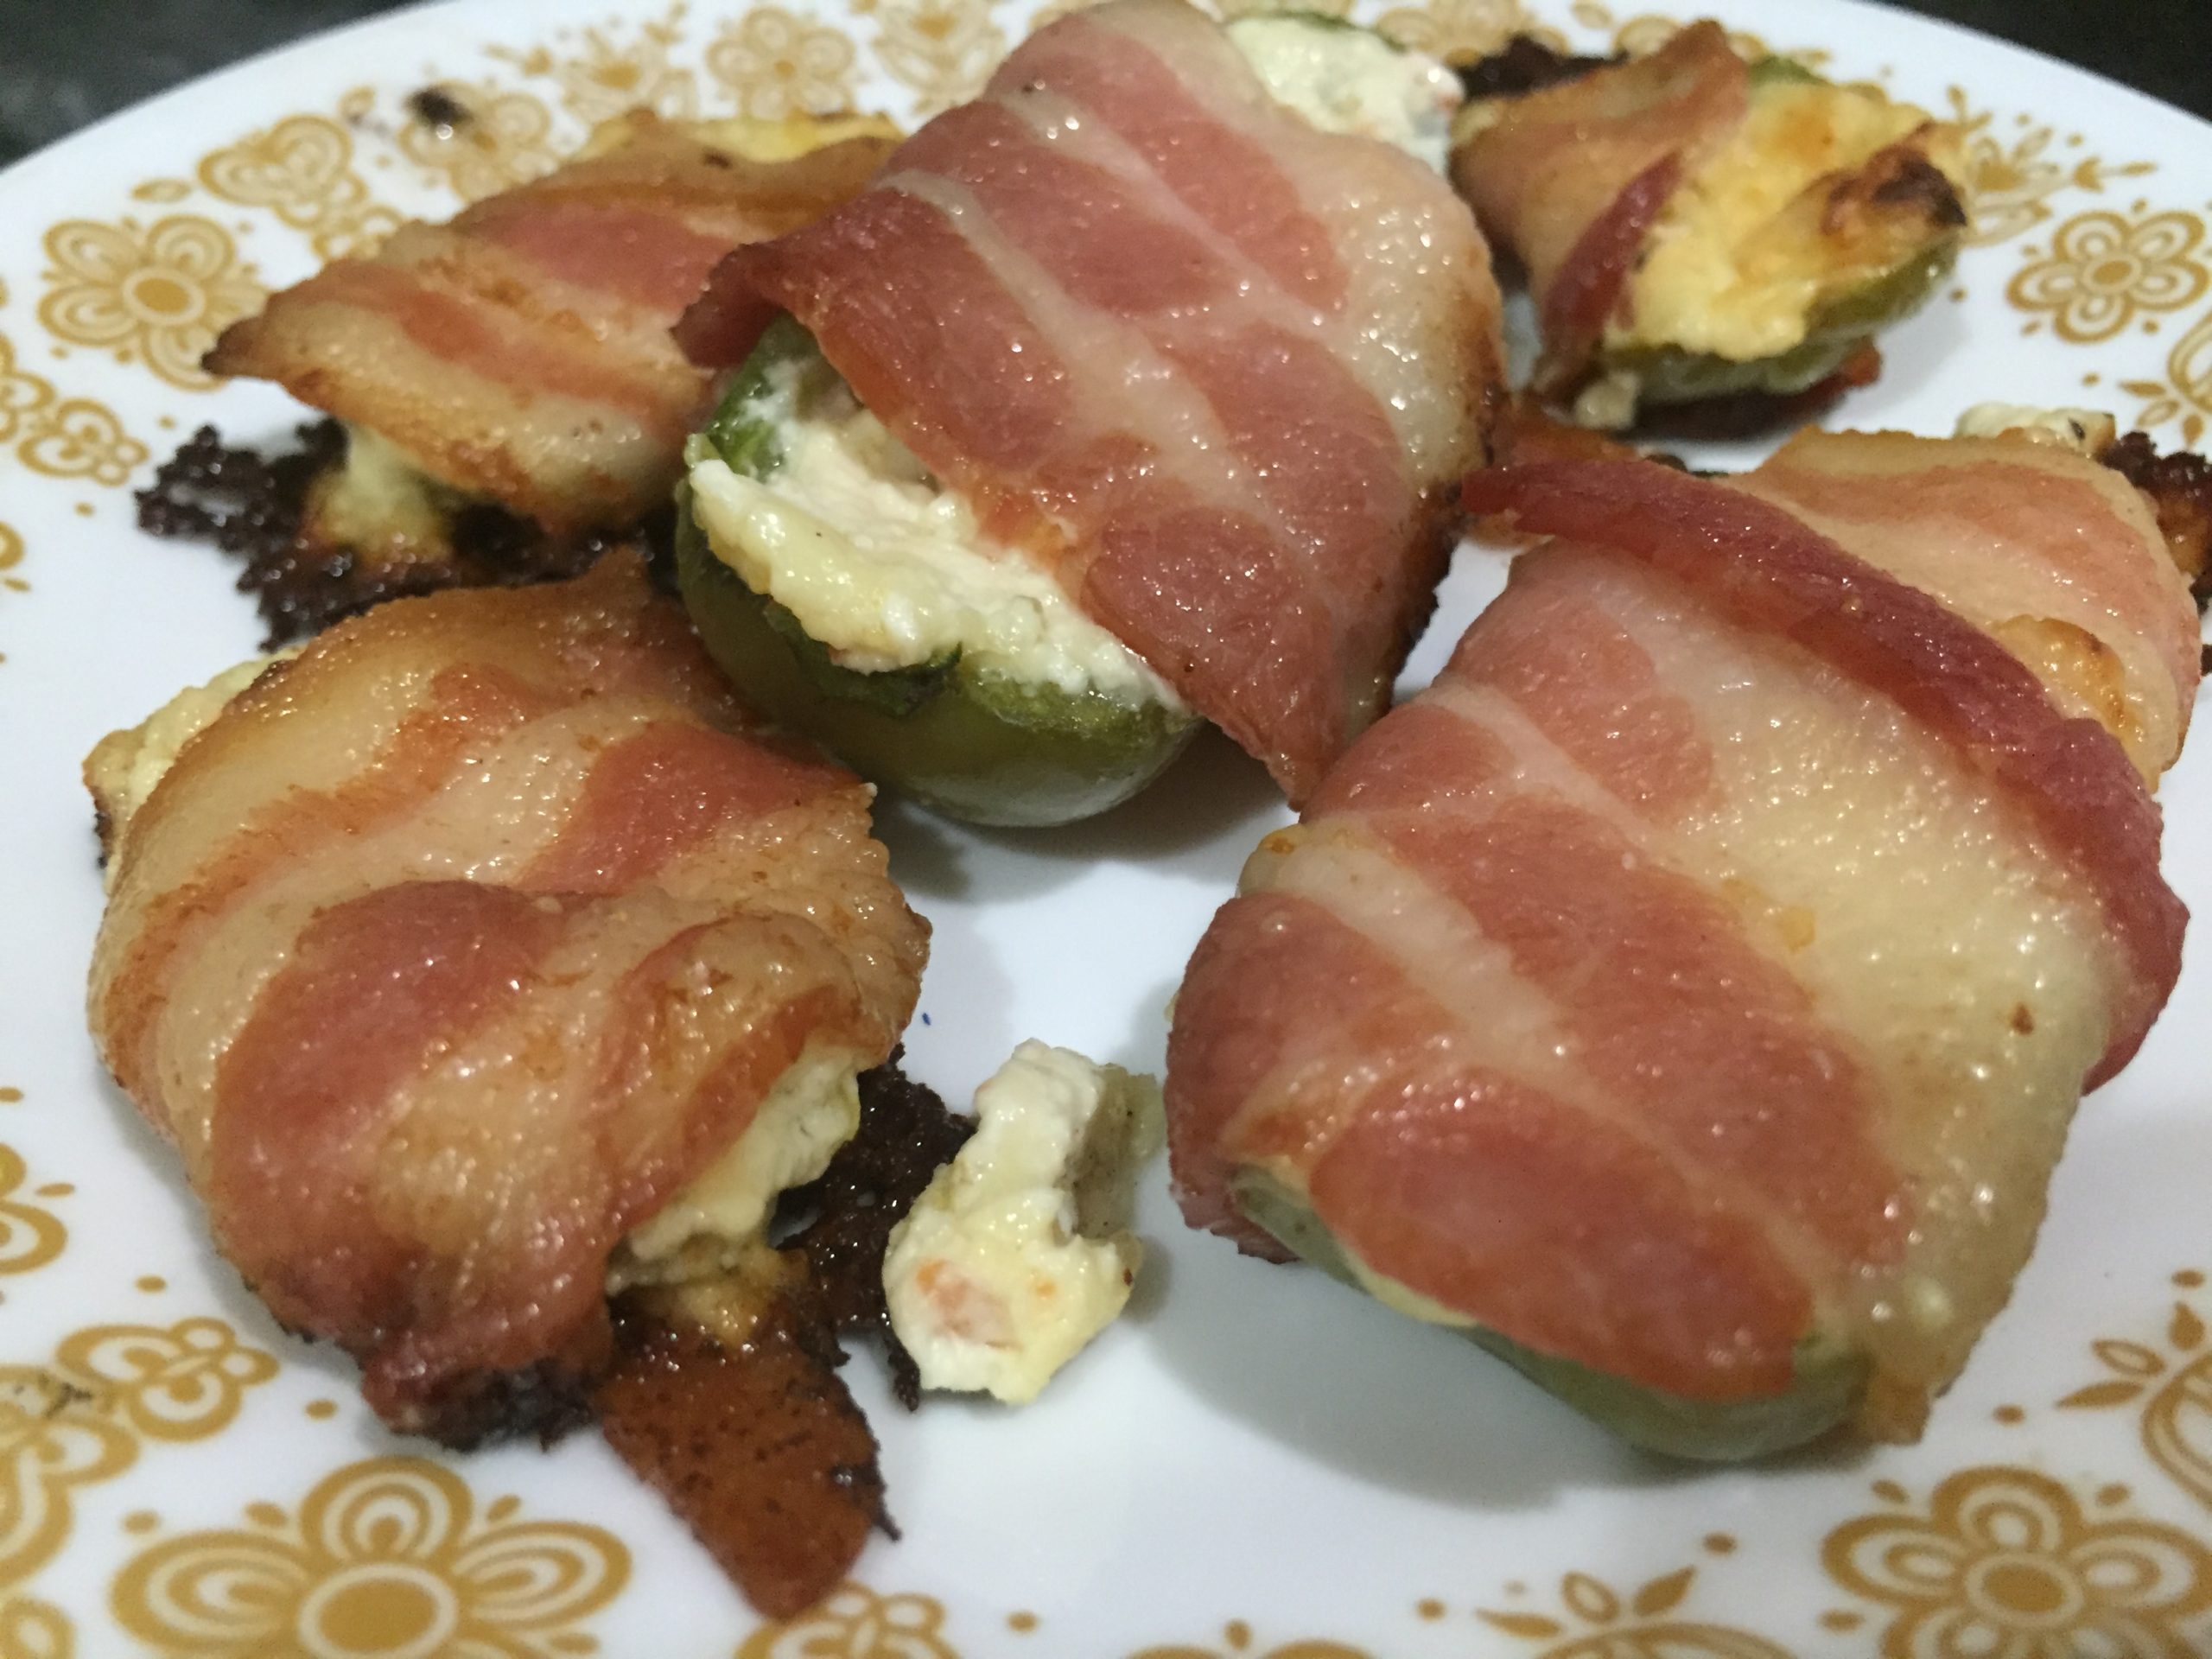 Baked Jalapeno Poppers @ bestwithchocolate.com